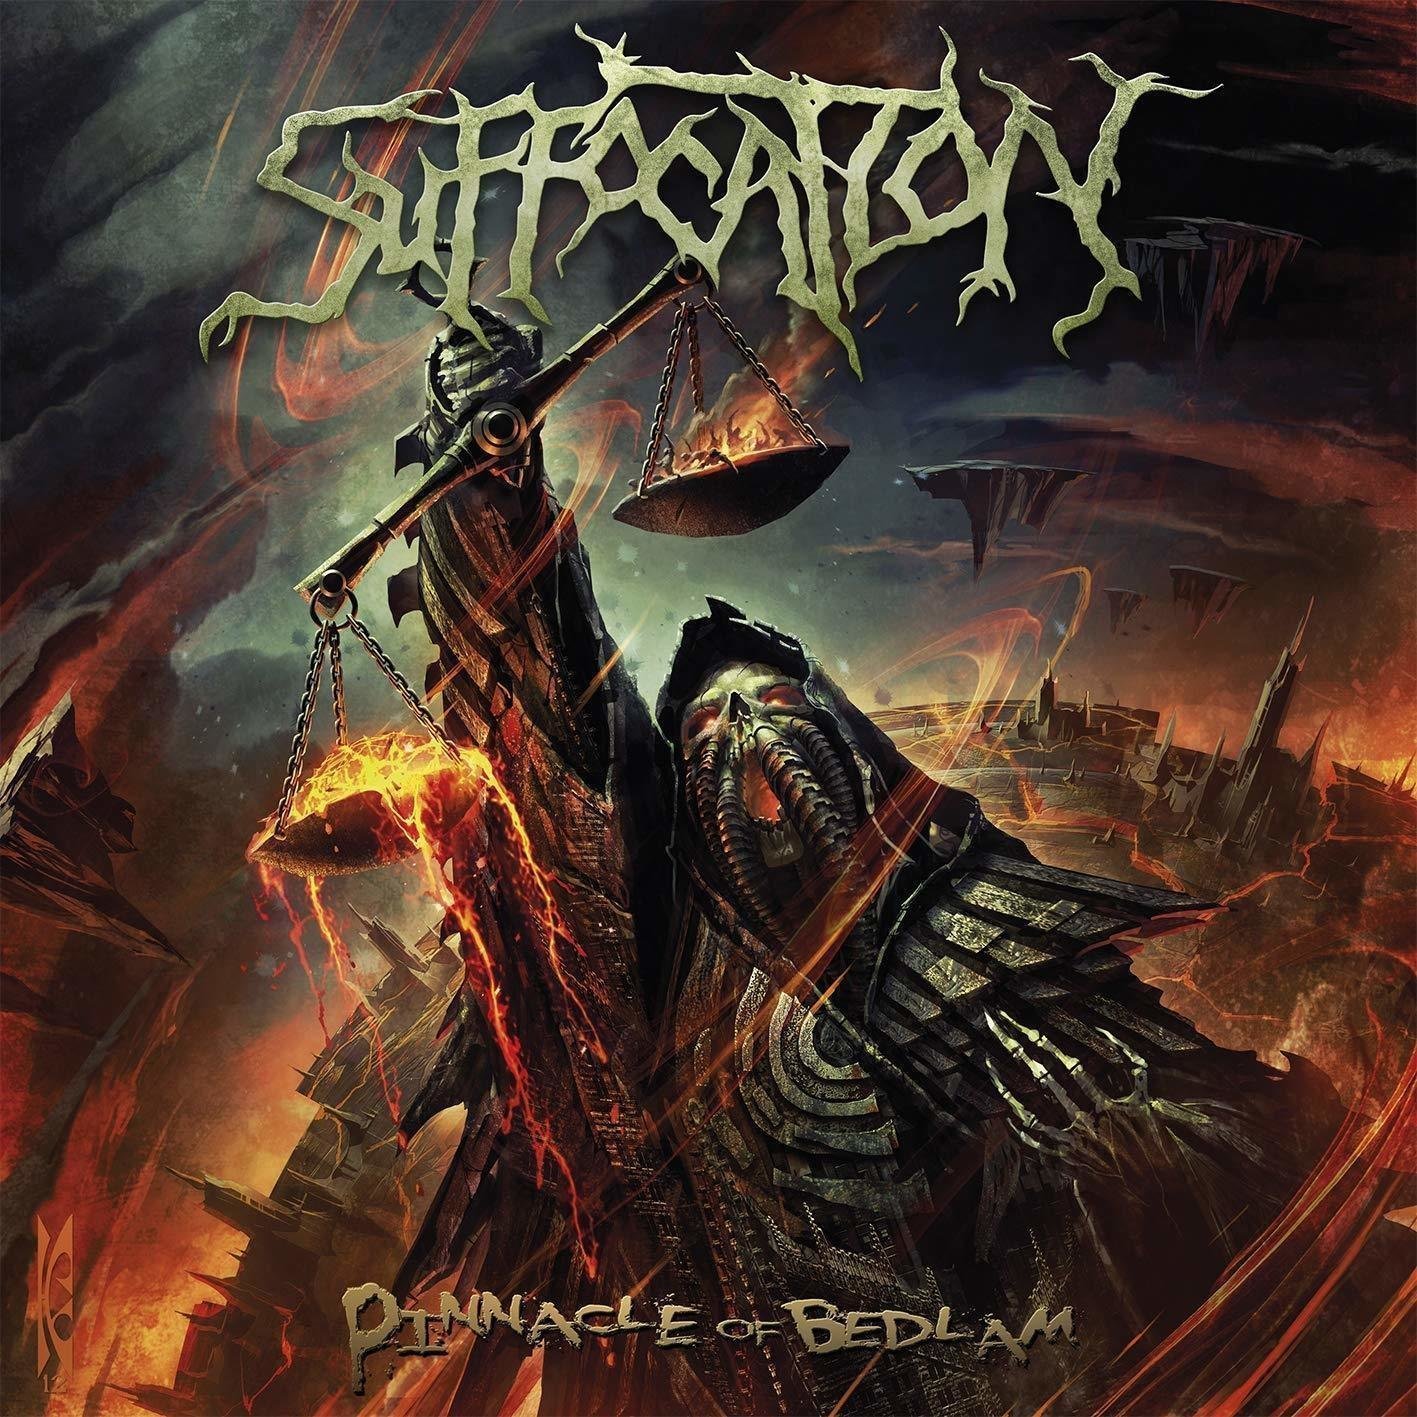 Vinyl Record Suffocation - Pinnacle Of Bedlam (Limited Edition) (LP)